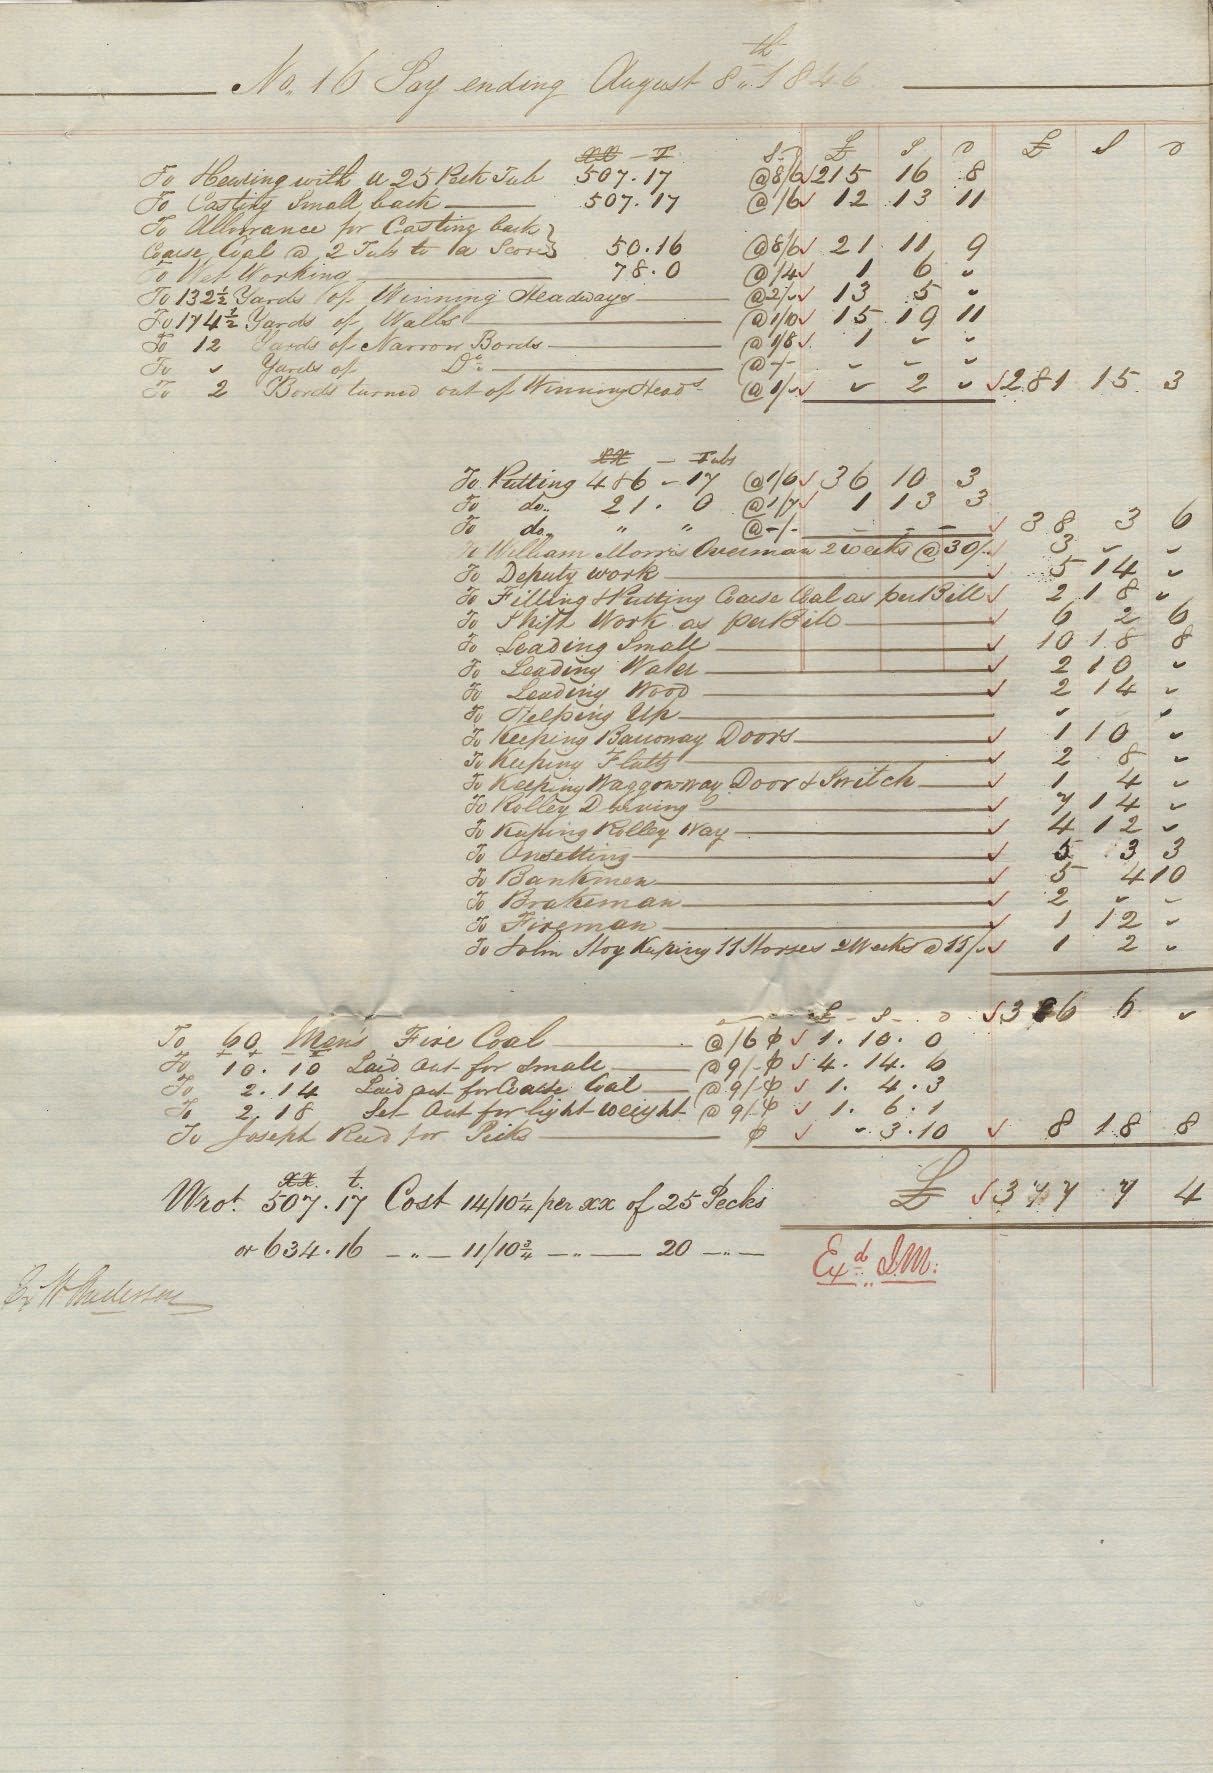 Picture of Bedlington Colliery Paybill